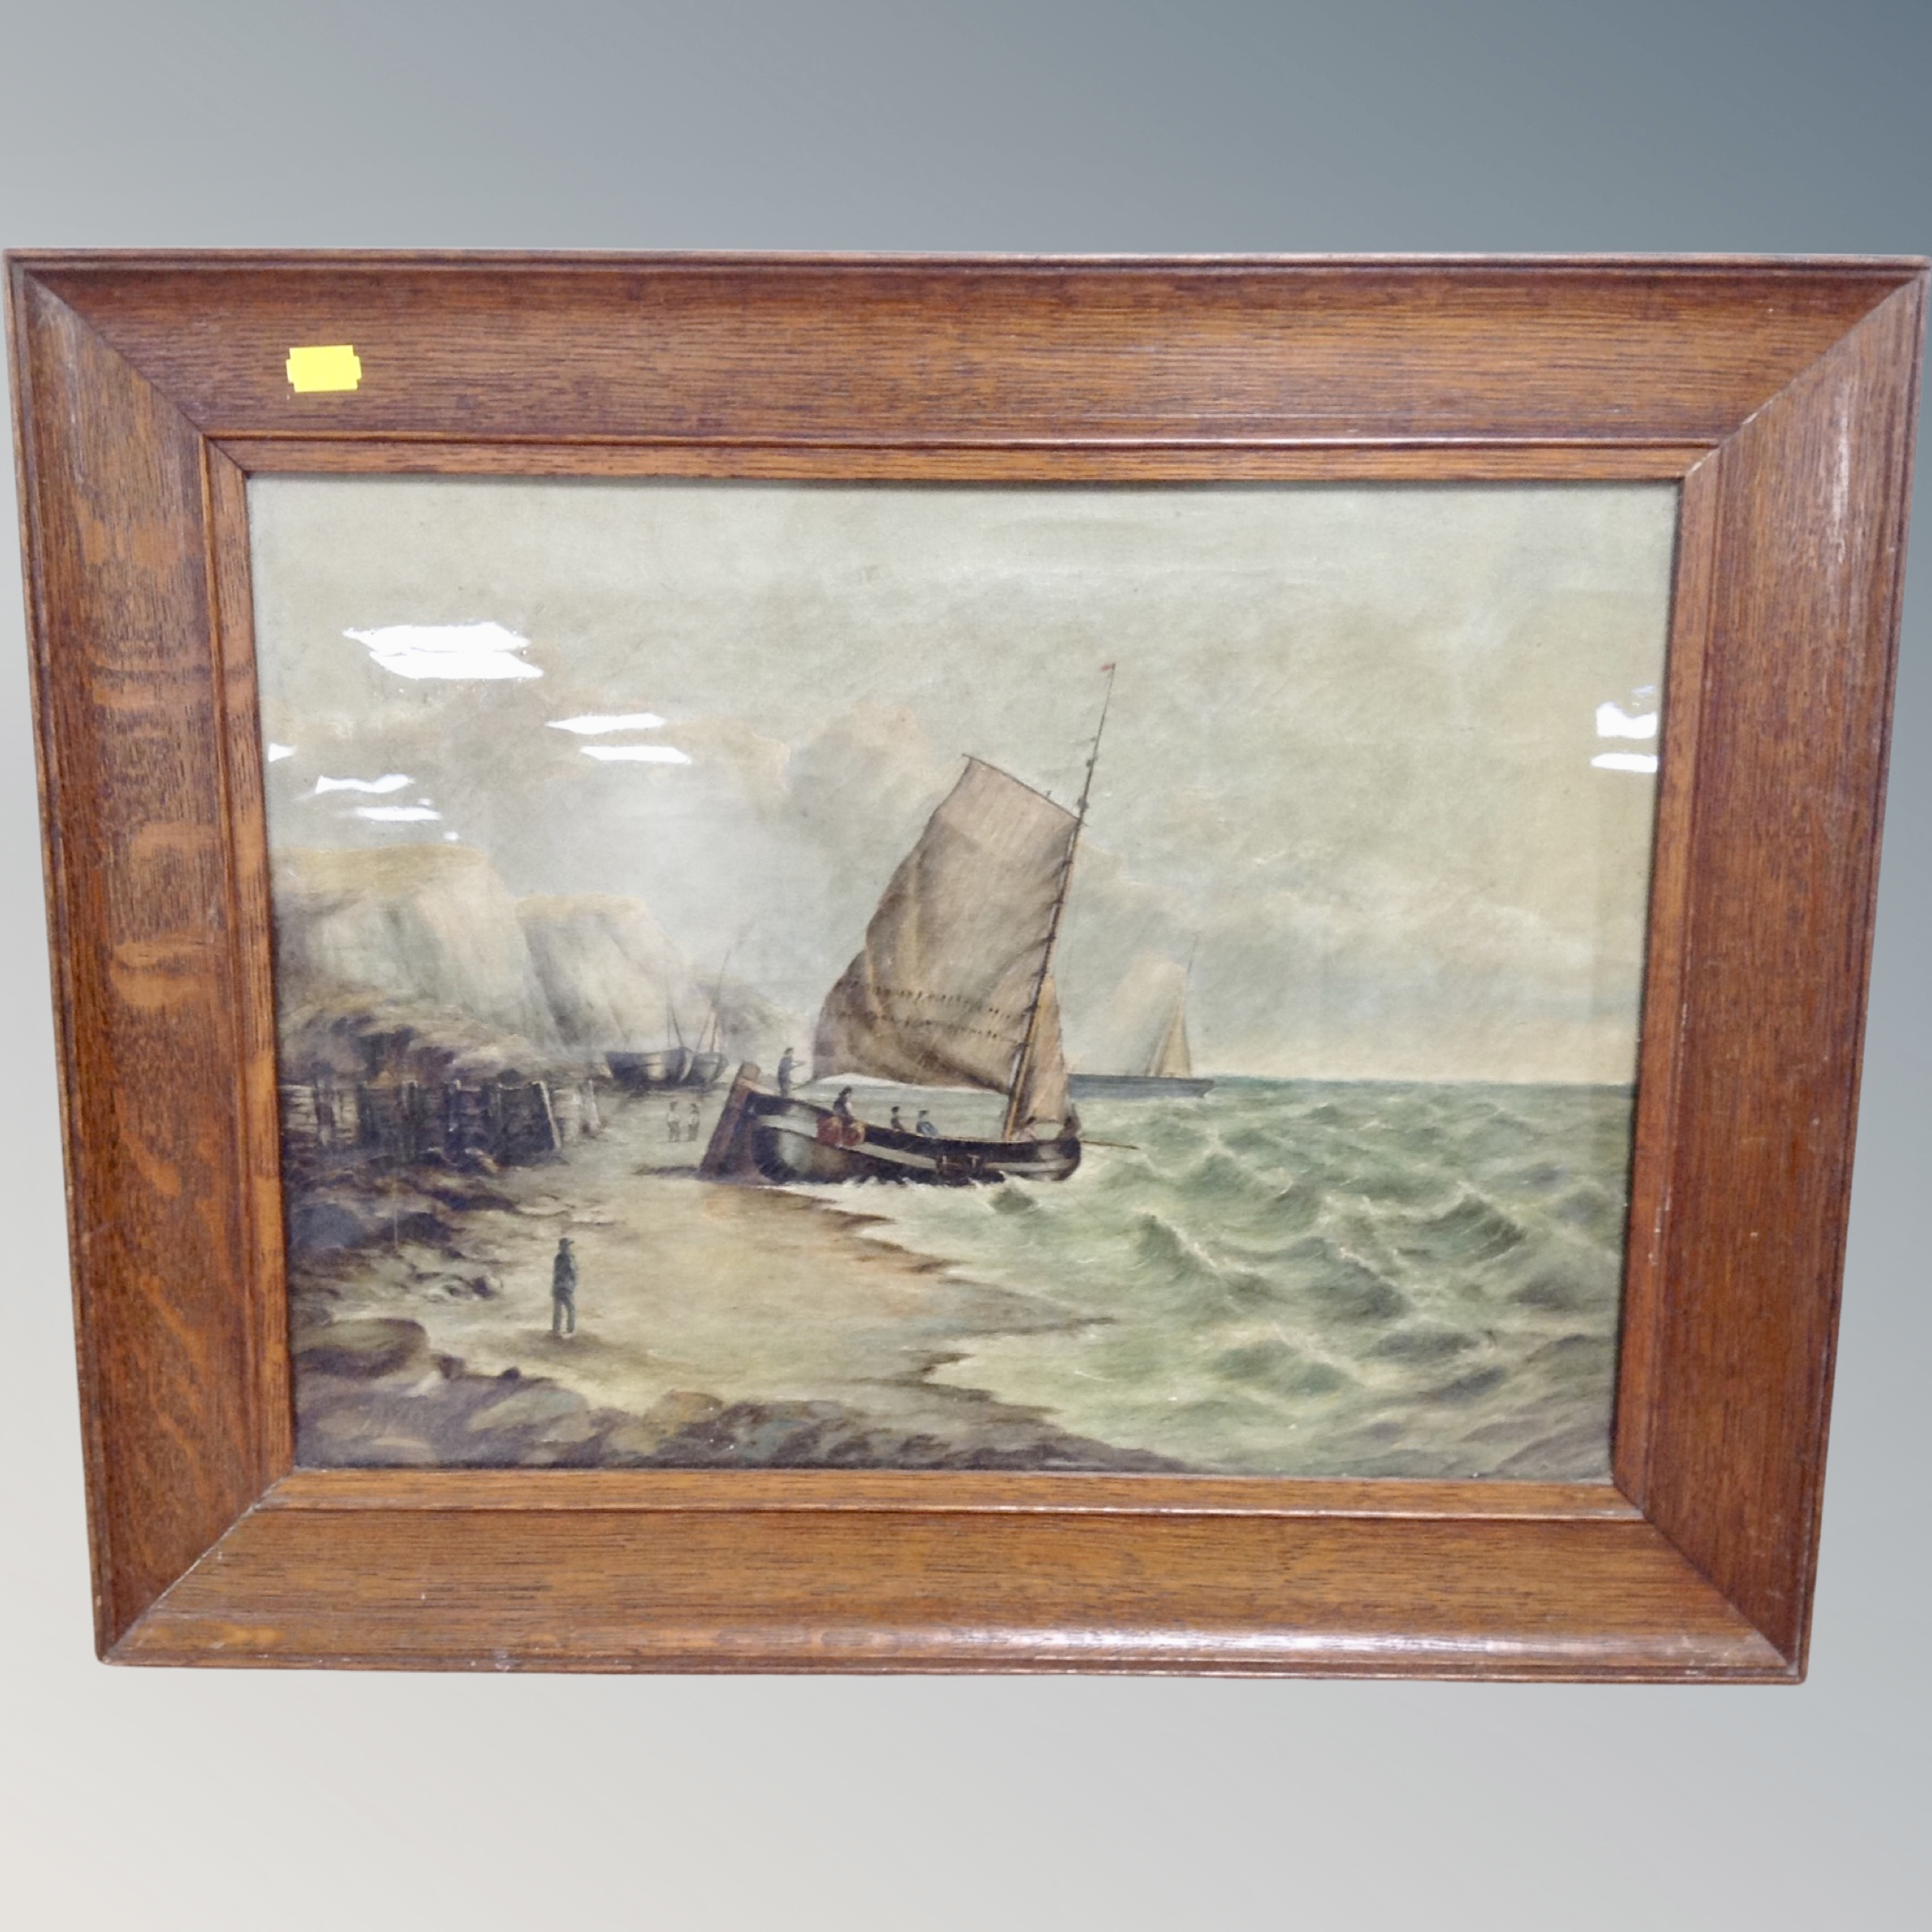 LAte 19th century school, A boat launching off coast line, oil on canvas, indistinctly signed,